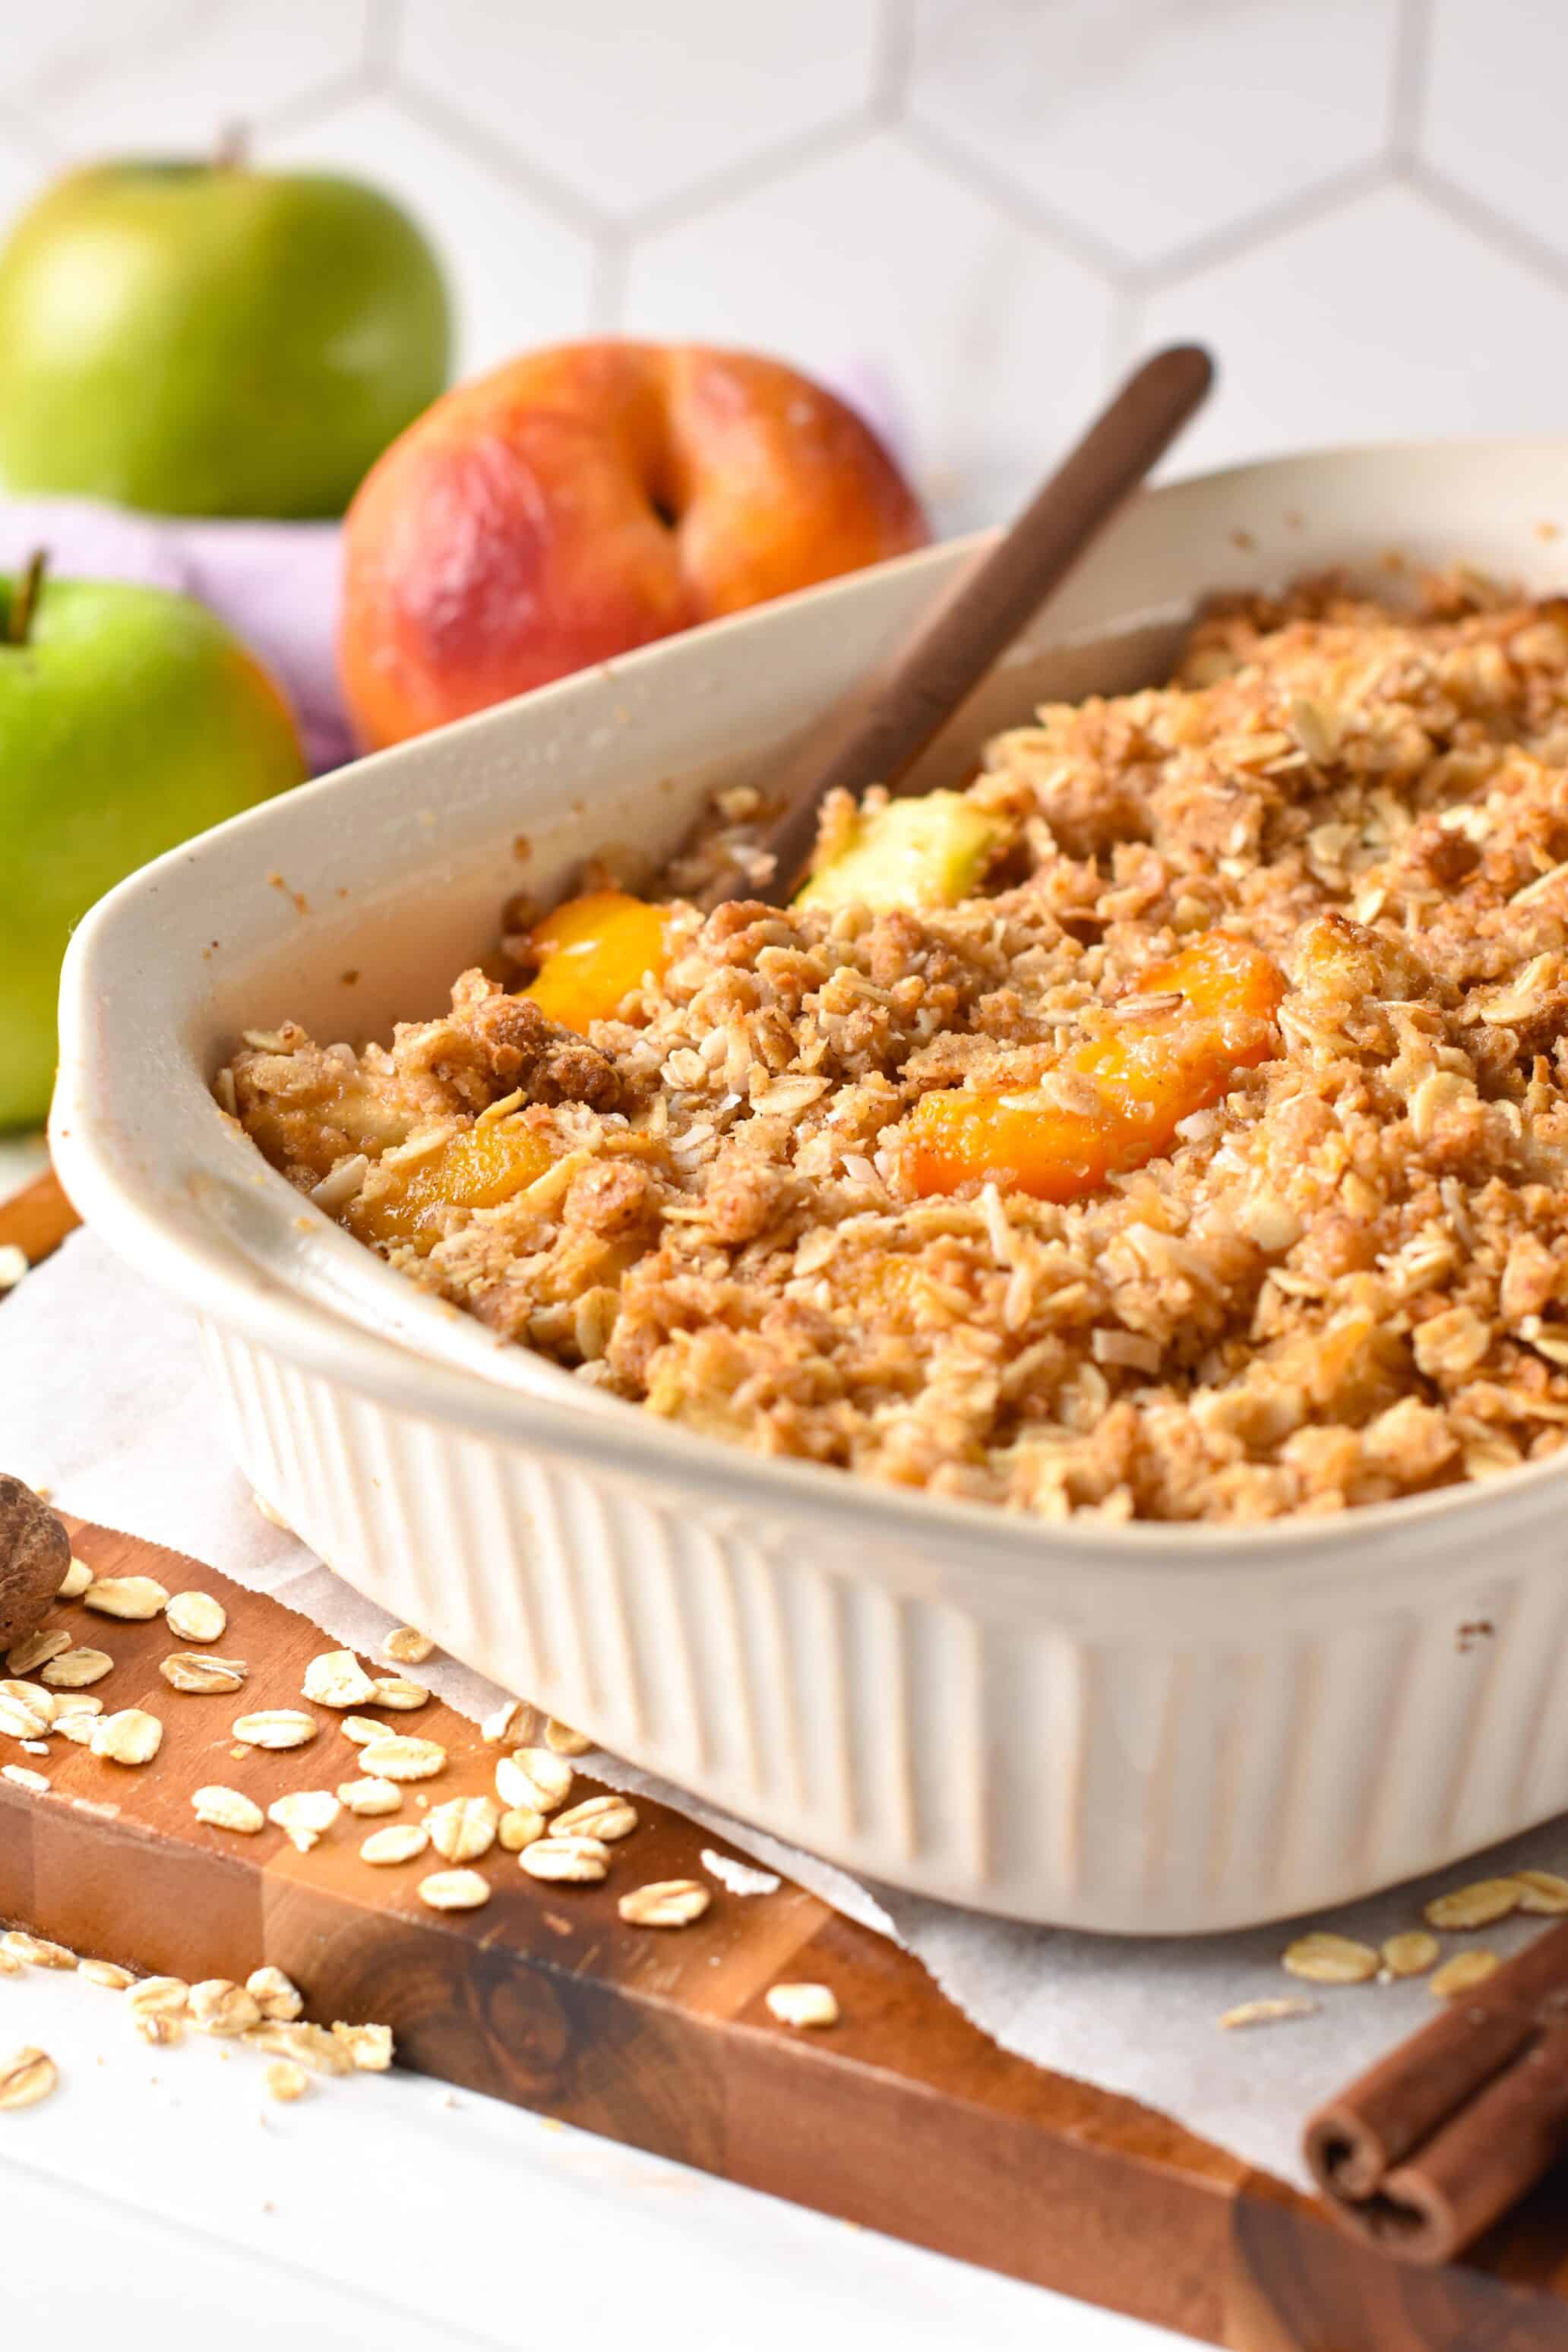 Apple and Peach Crumble in a white ceramic pan with a wooden spoon in it and apples next to it.